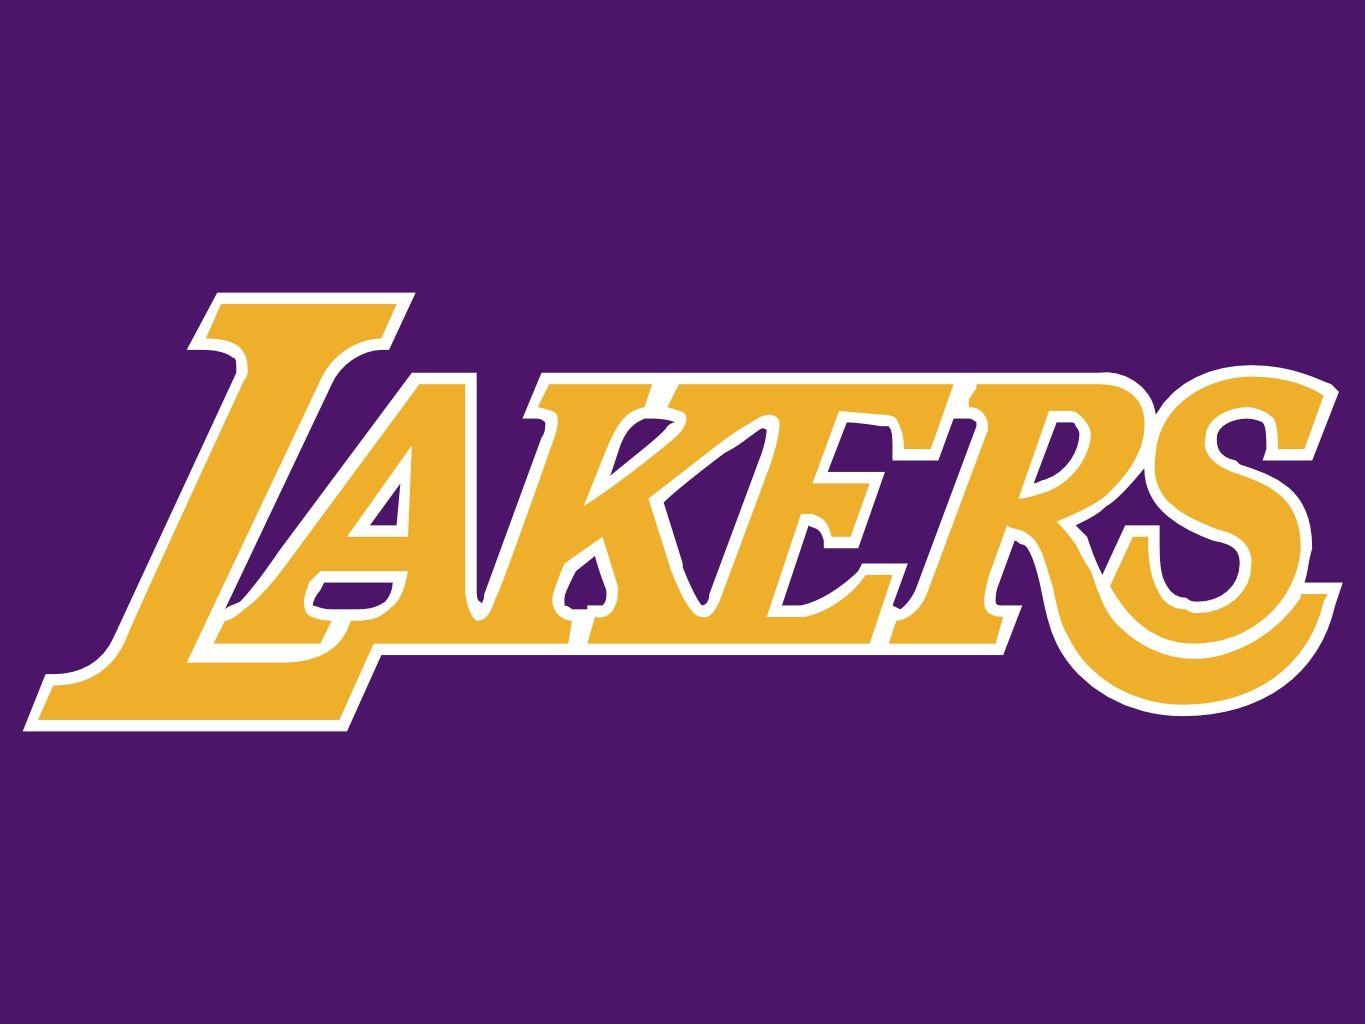 Purple and Yellow Logo - The Lakers logo is an excellent example of using purple and yellow